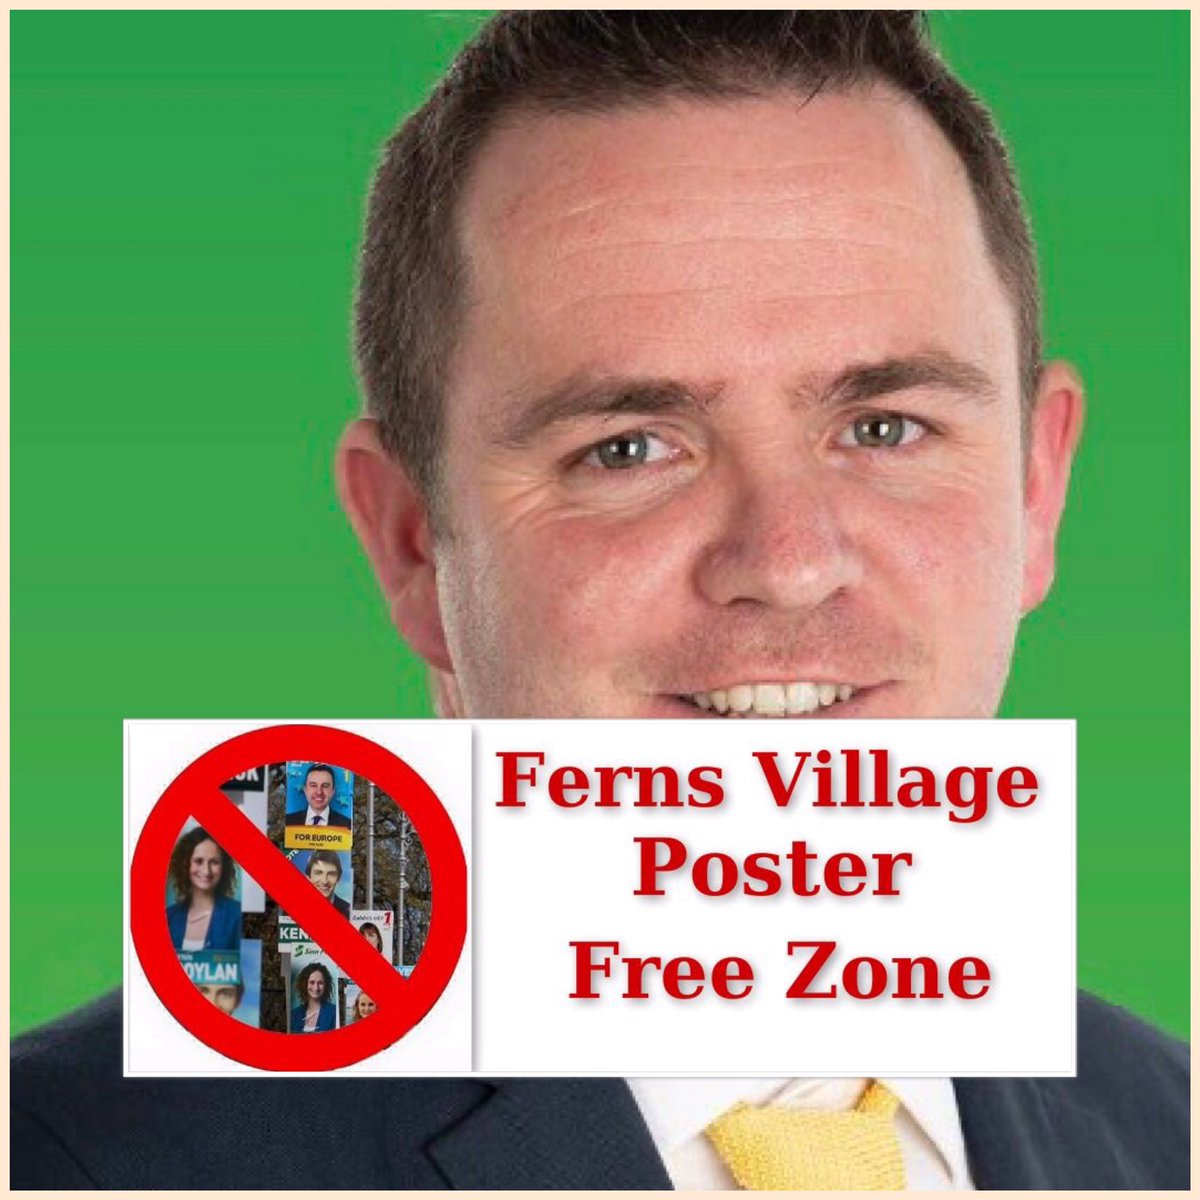 Aidan Browne, Fianna Fáil candidate, Enniscorthy Municipal District has been in contact to say he will not erect election posters along the green areas or within the town limits on all approach roads to the village or in pollinator areas. #posterfree  #LE19 @fiannafailparty